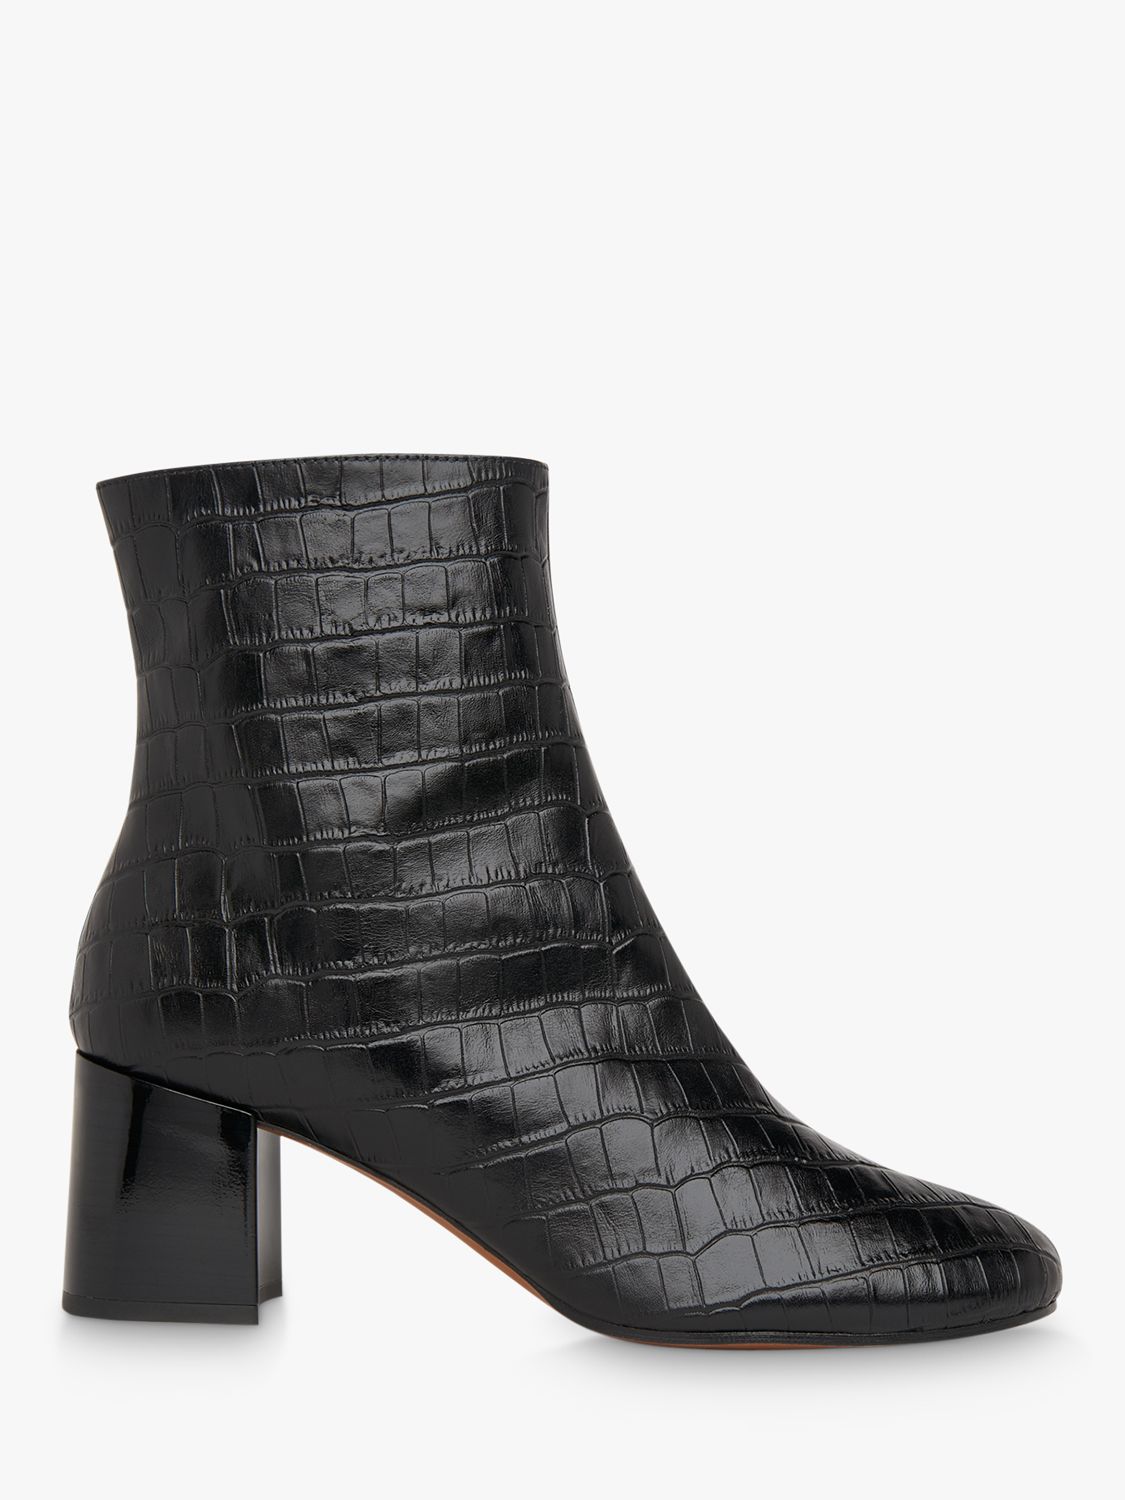 Whistles Elora Leather Croc Effect Ankle Boots, Black